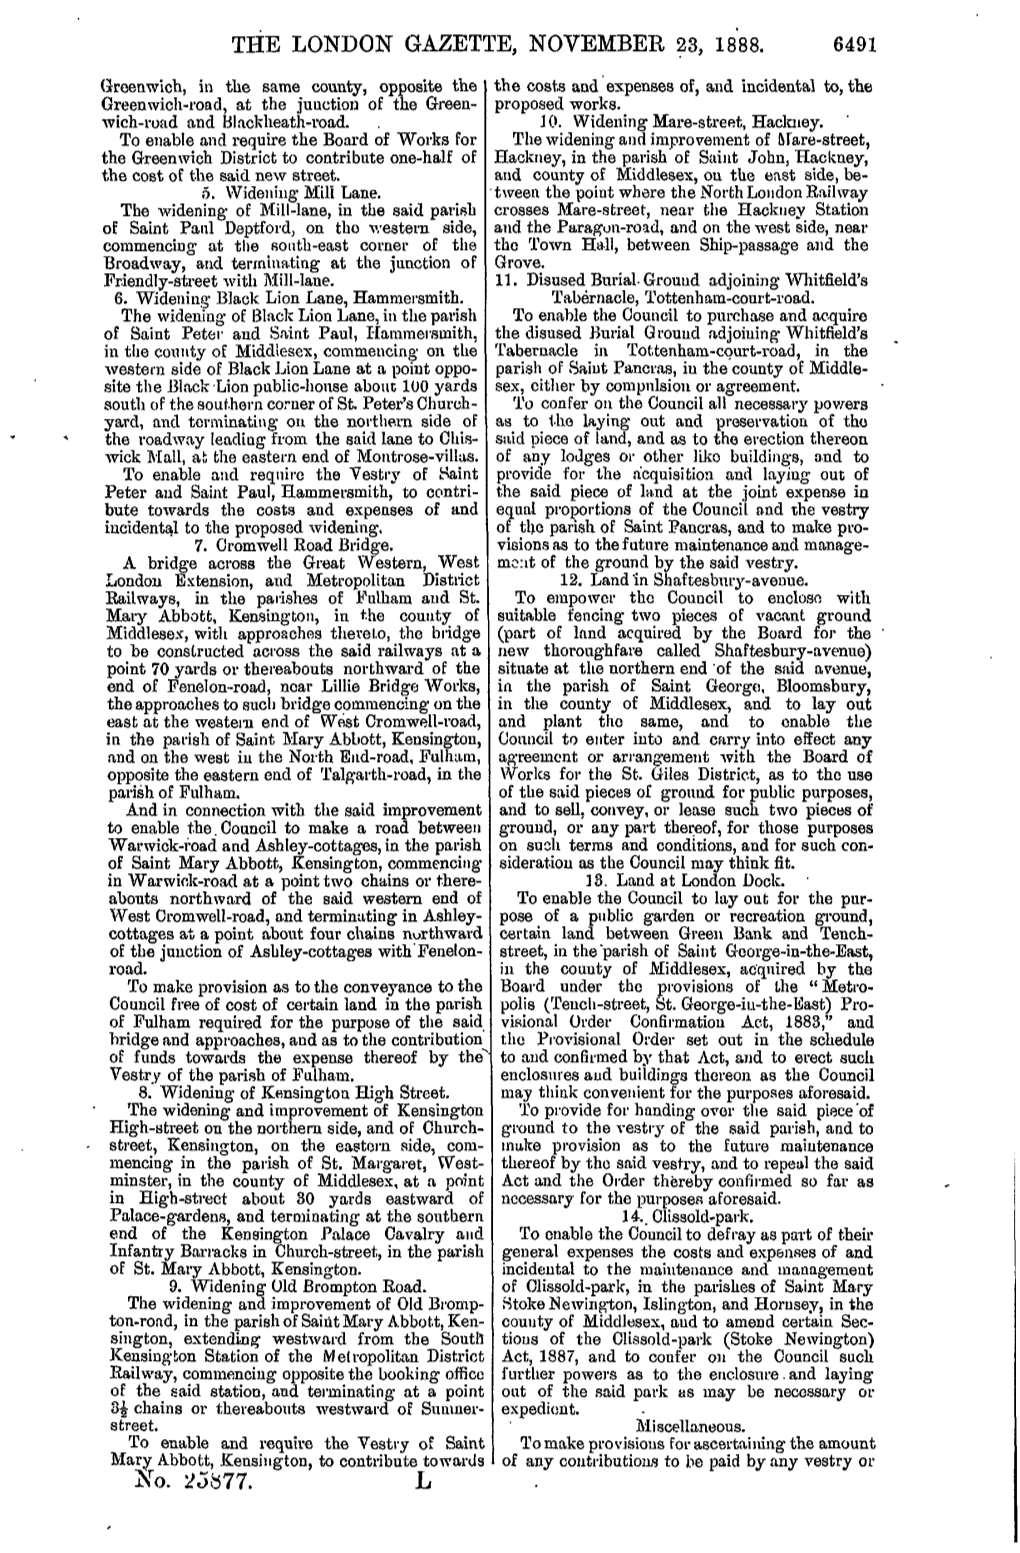 The London Gazette, Issue 25877, Page 6491